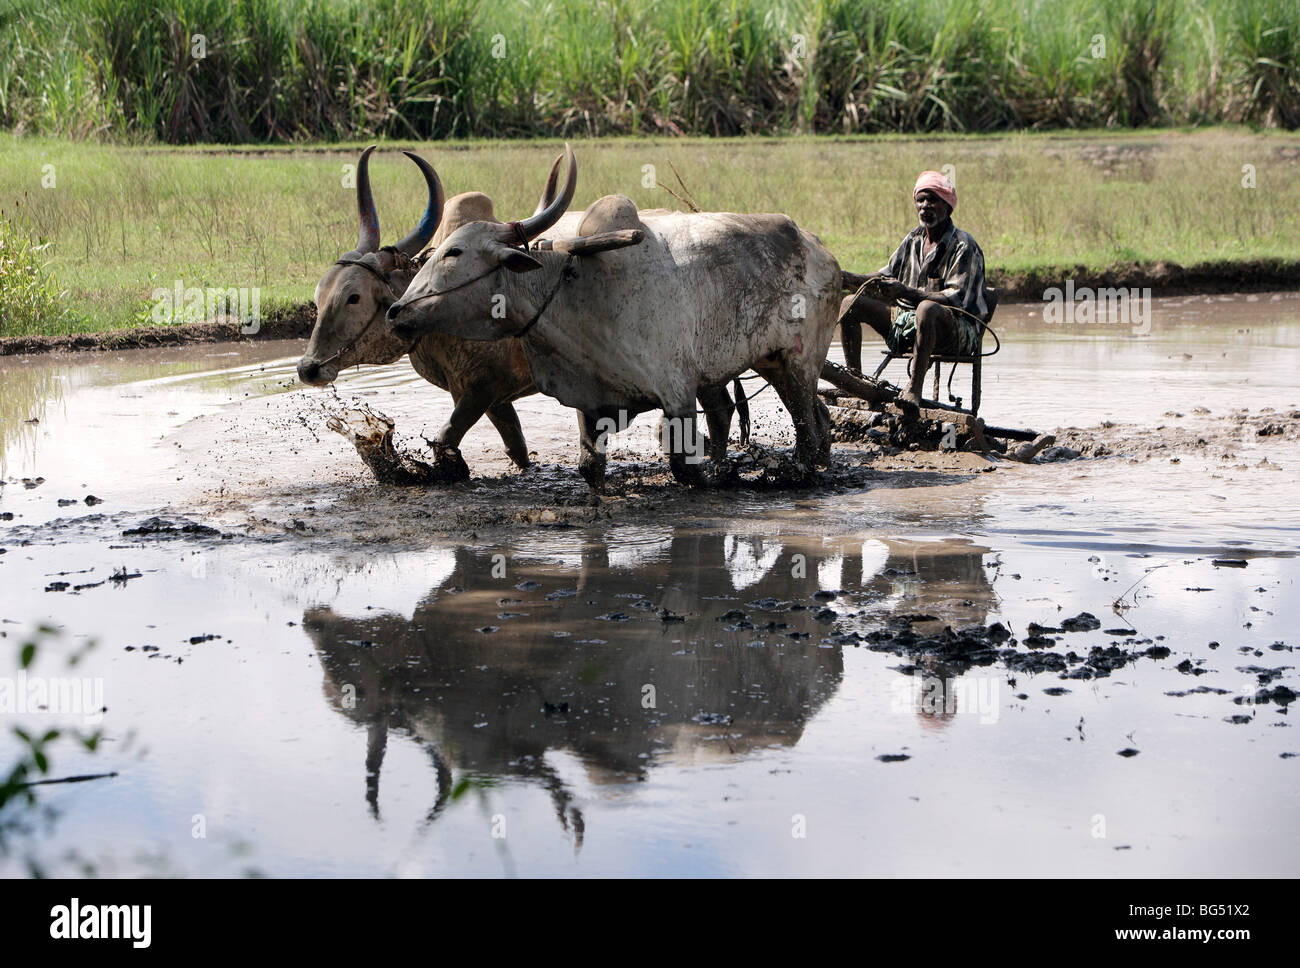 Farmer ploughing a rice field using traditional oxen pulled plough, India Stock Photo